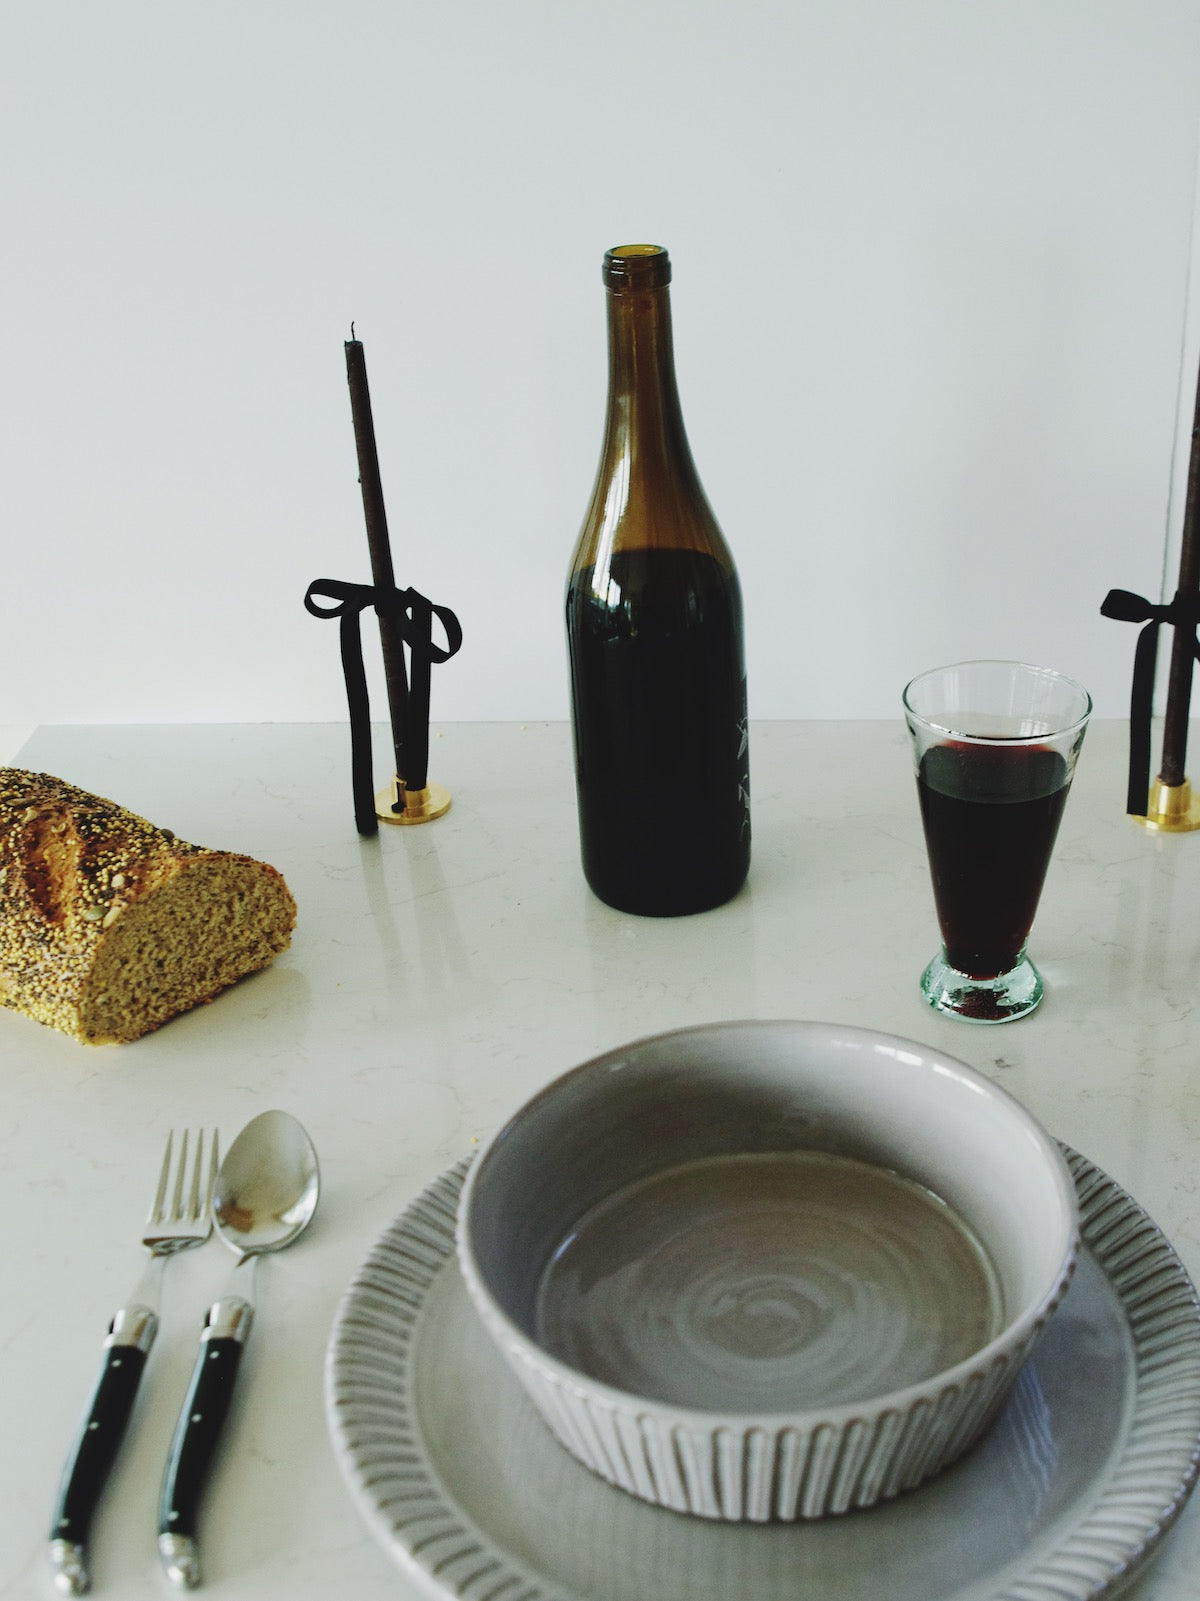 Table setting with grey ceramic dishes, black-handled silverware, a slice of bread, wine glass, bottle, and candle holders on a marble surface.